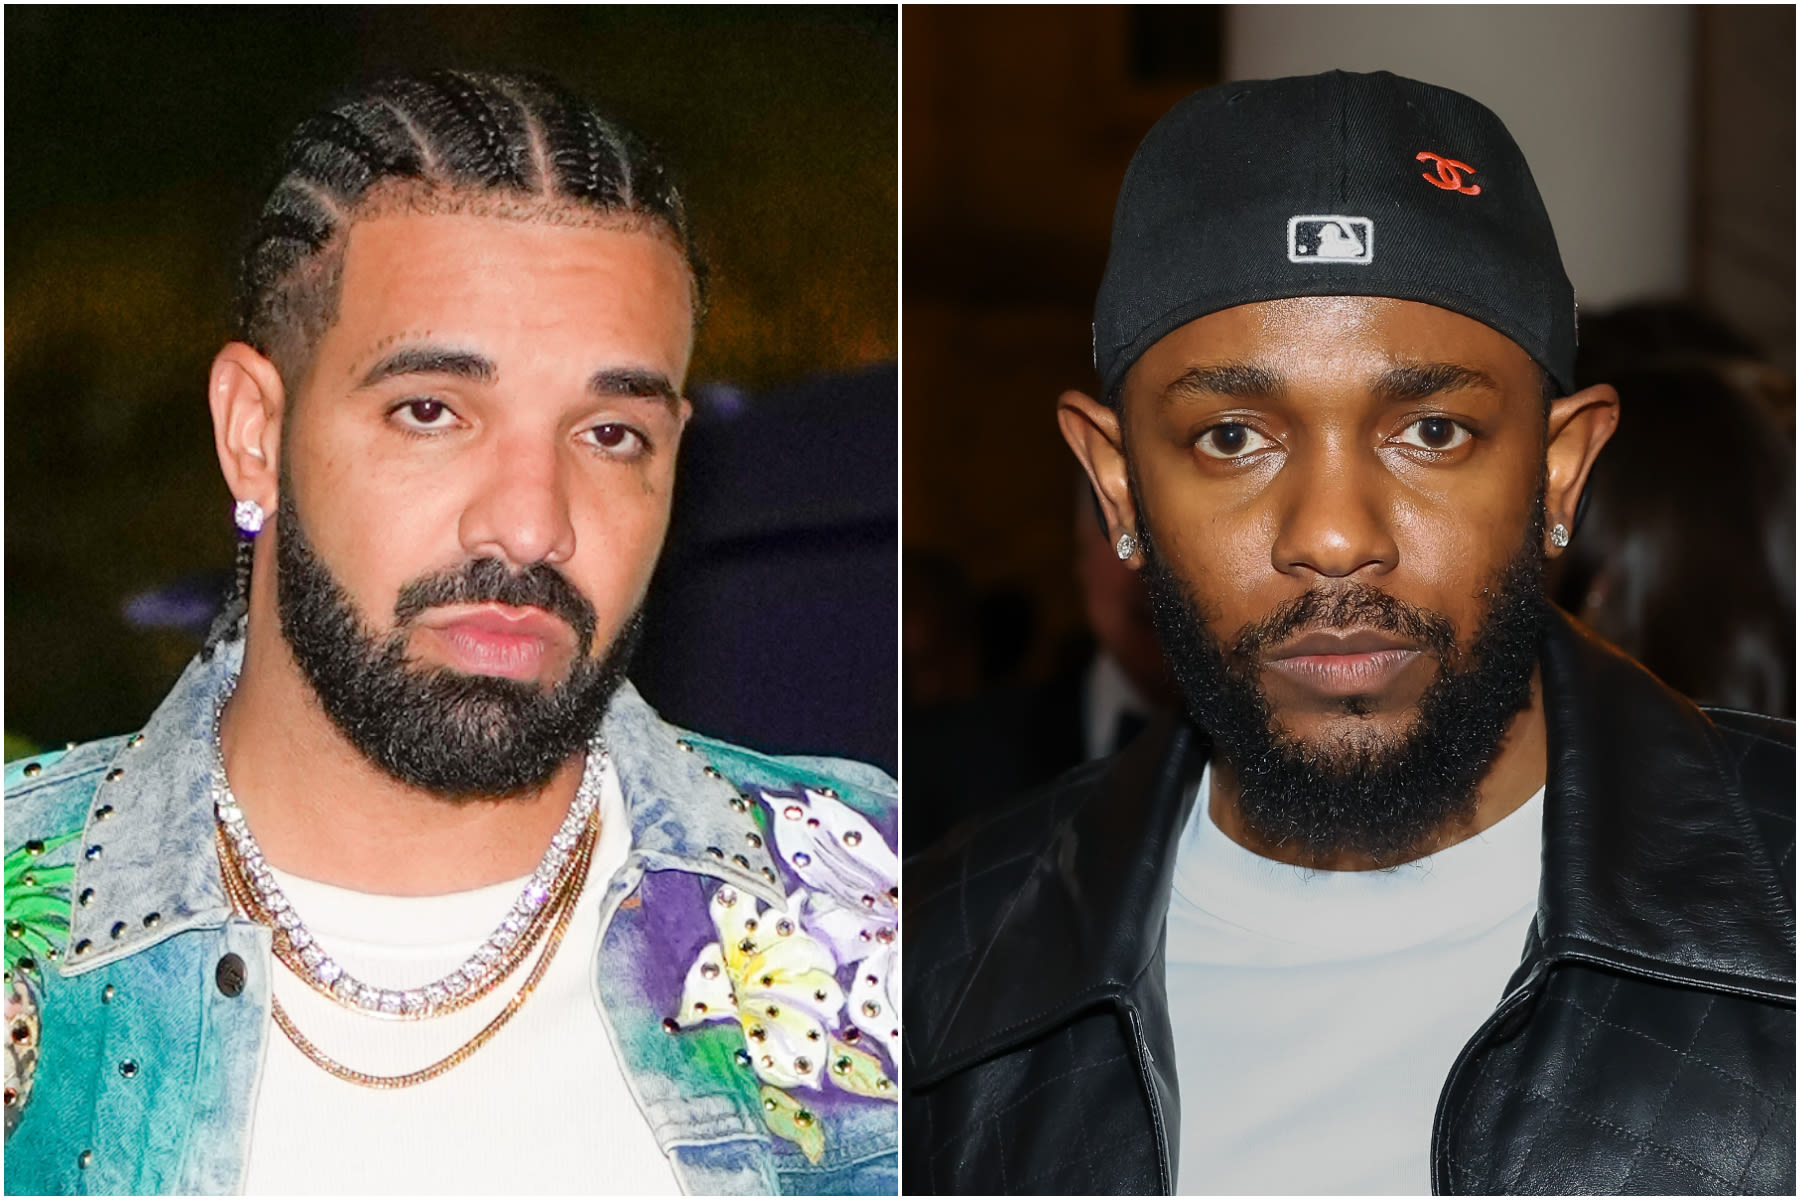 Viral Conspiracy Theories About Drake, Kendrick Beef Are Spreading Fast